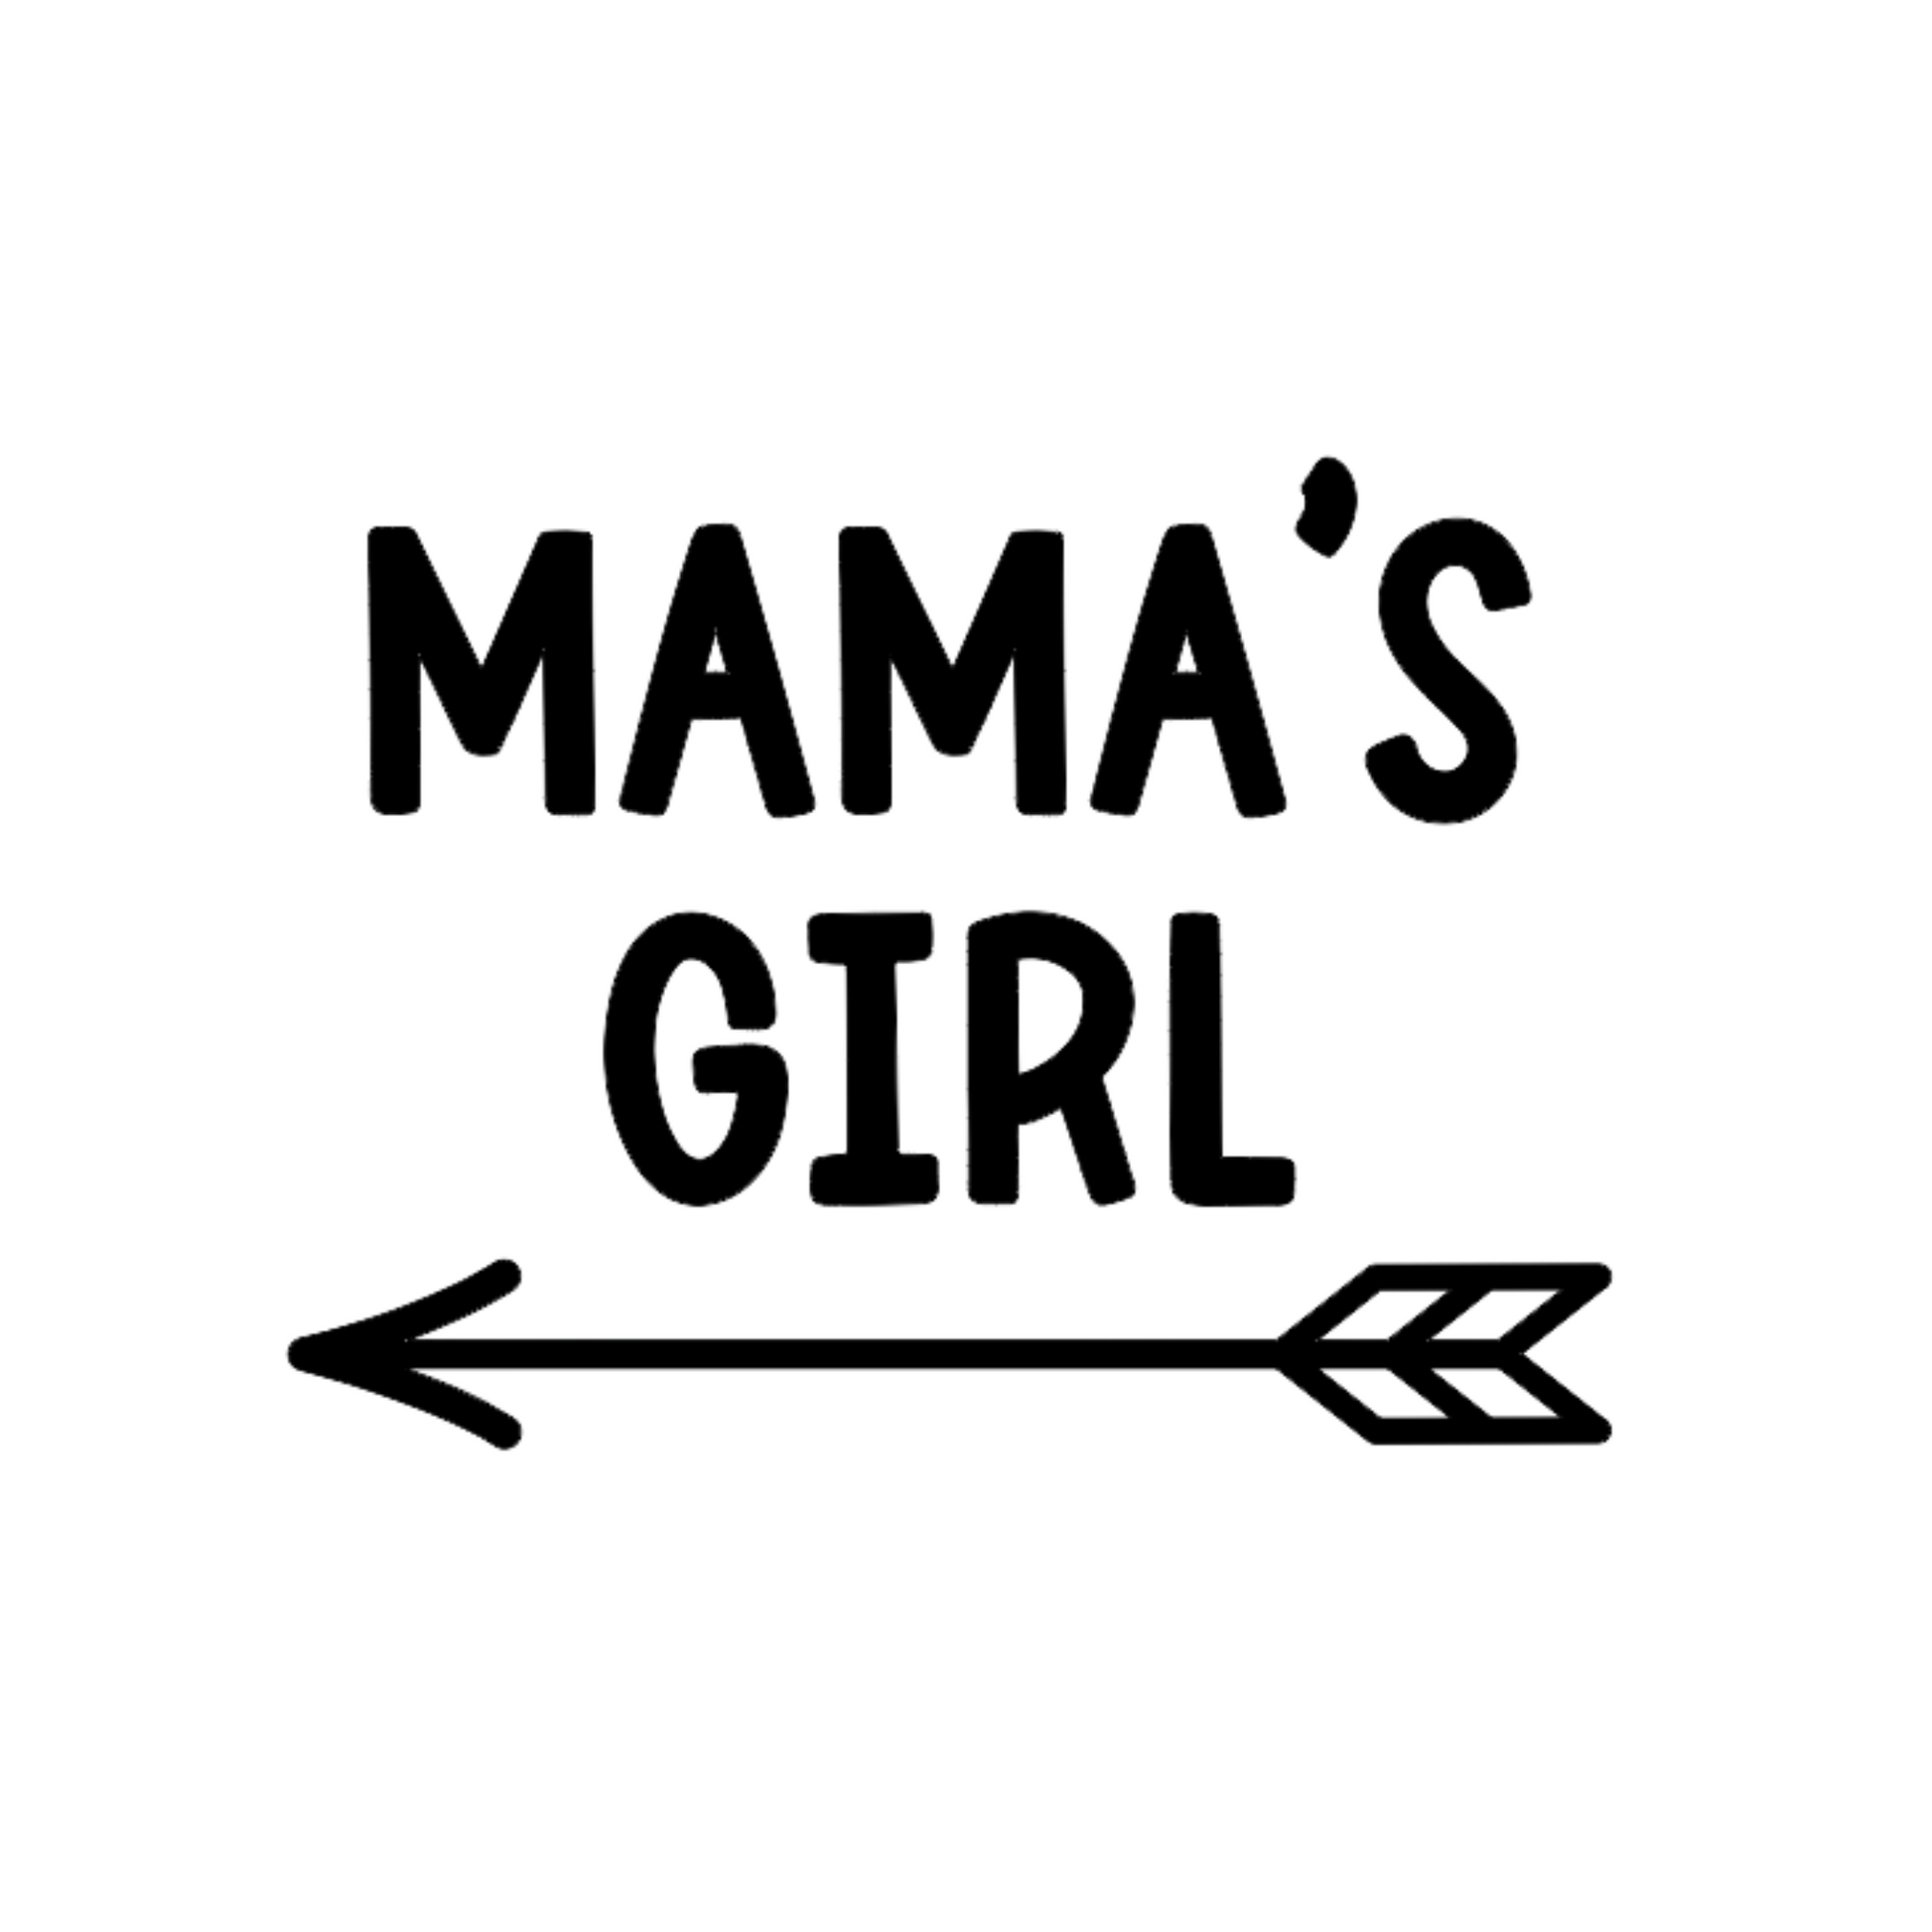 Mama's Girl design in black on white background. Mama's girl writing is on top with an adorable arrow on the bottom pointing to the left.